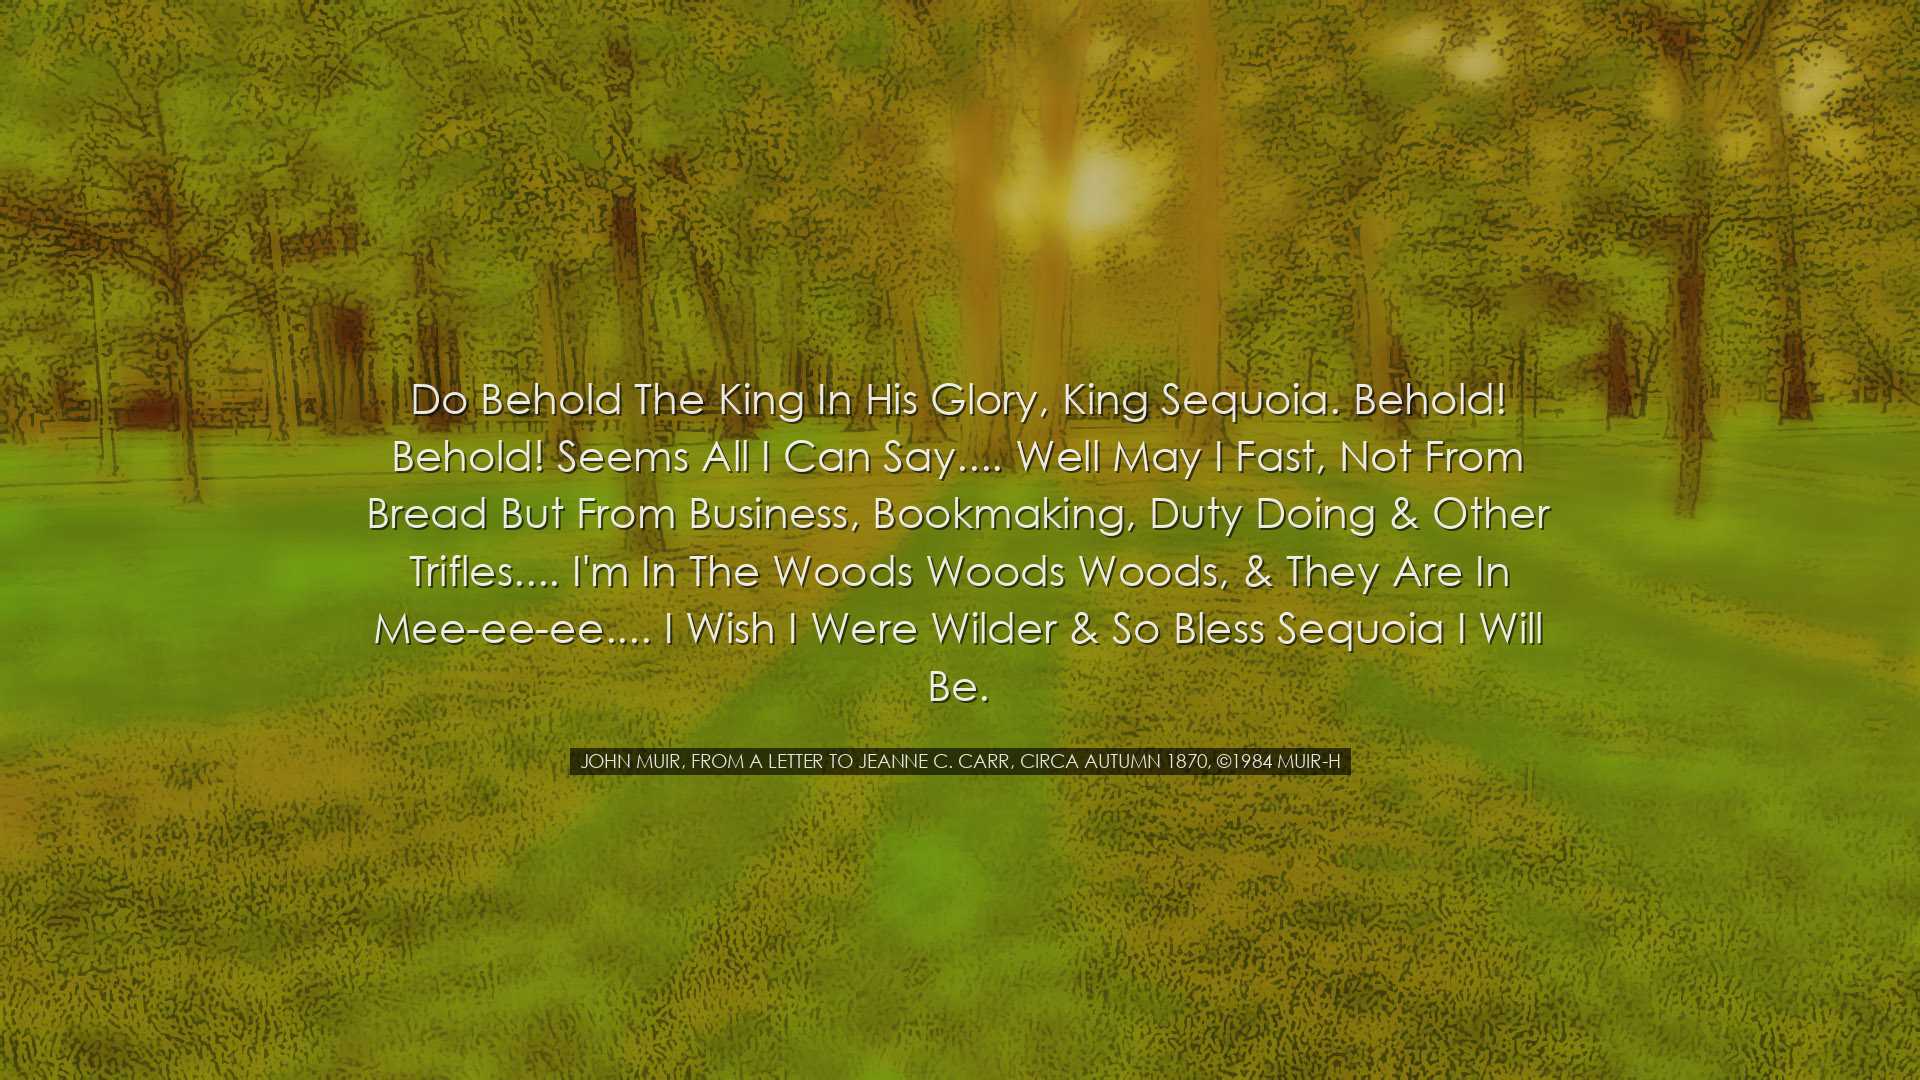 Do behold the king in his glory, King Sequoia. Behold! Behold! see